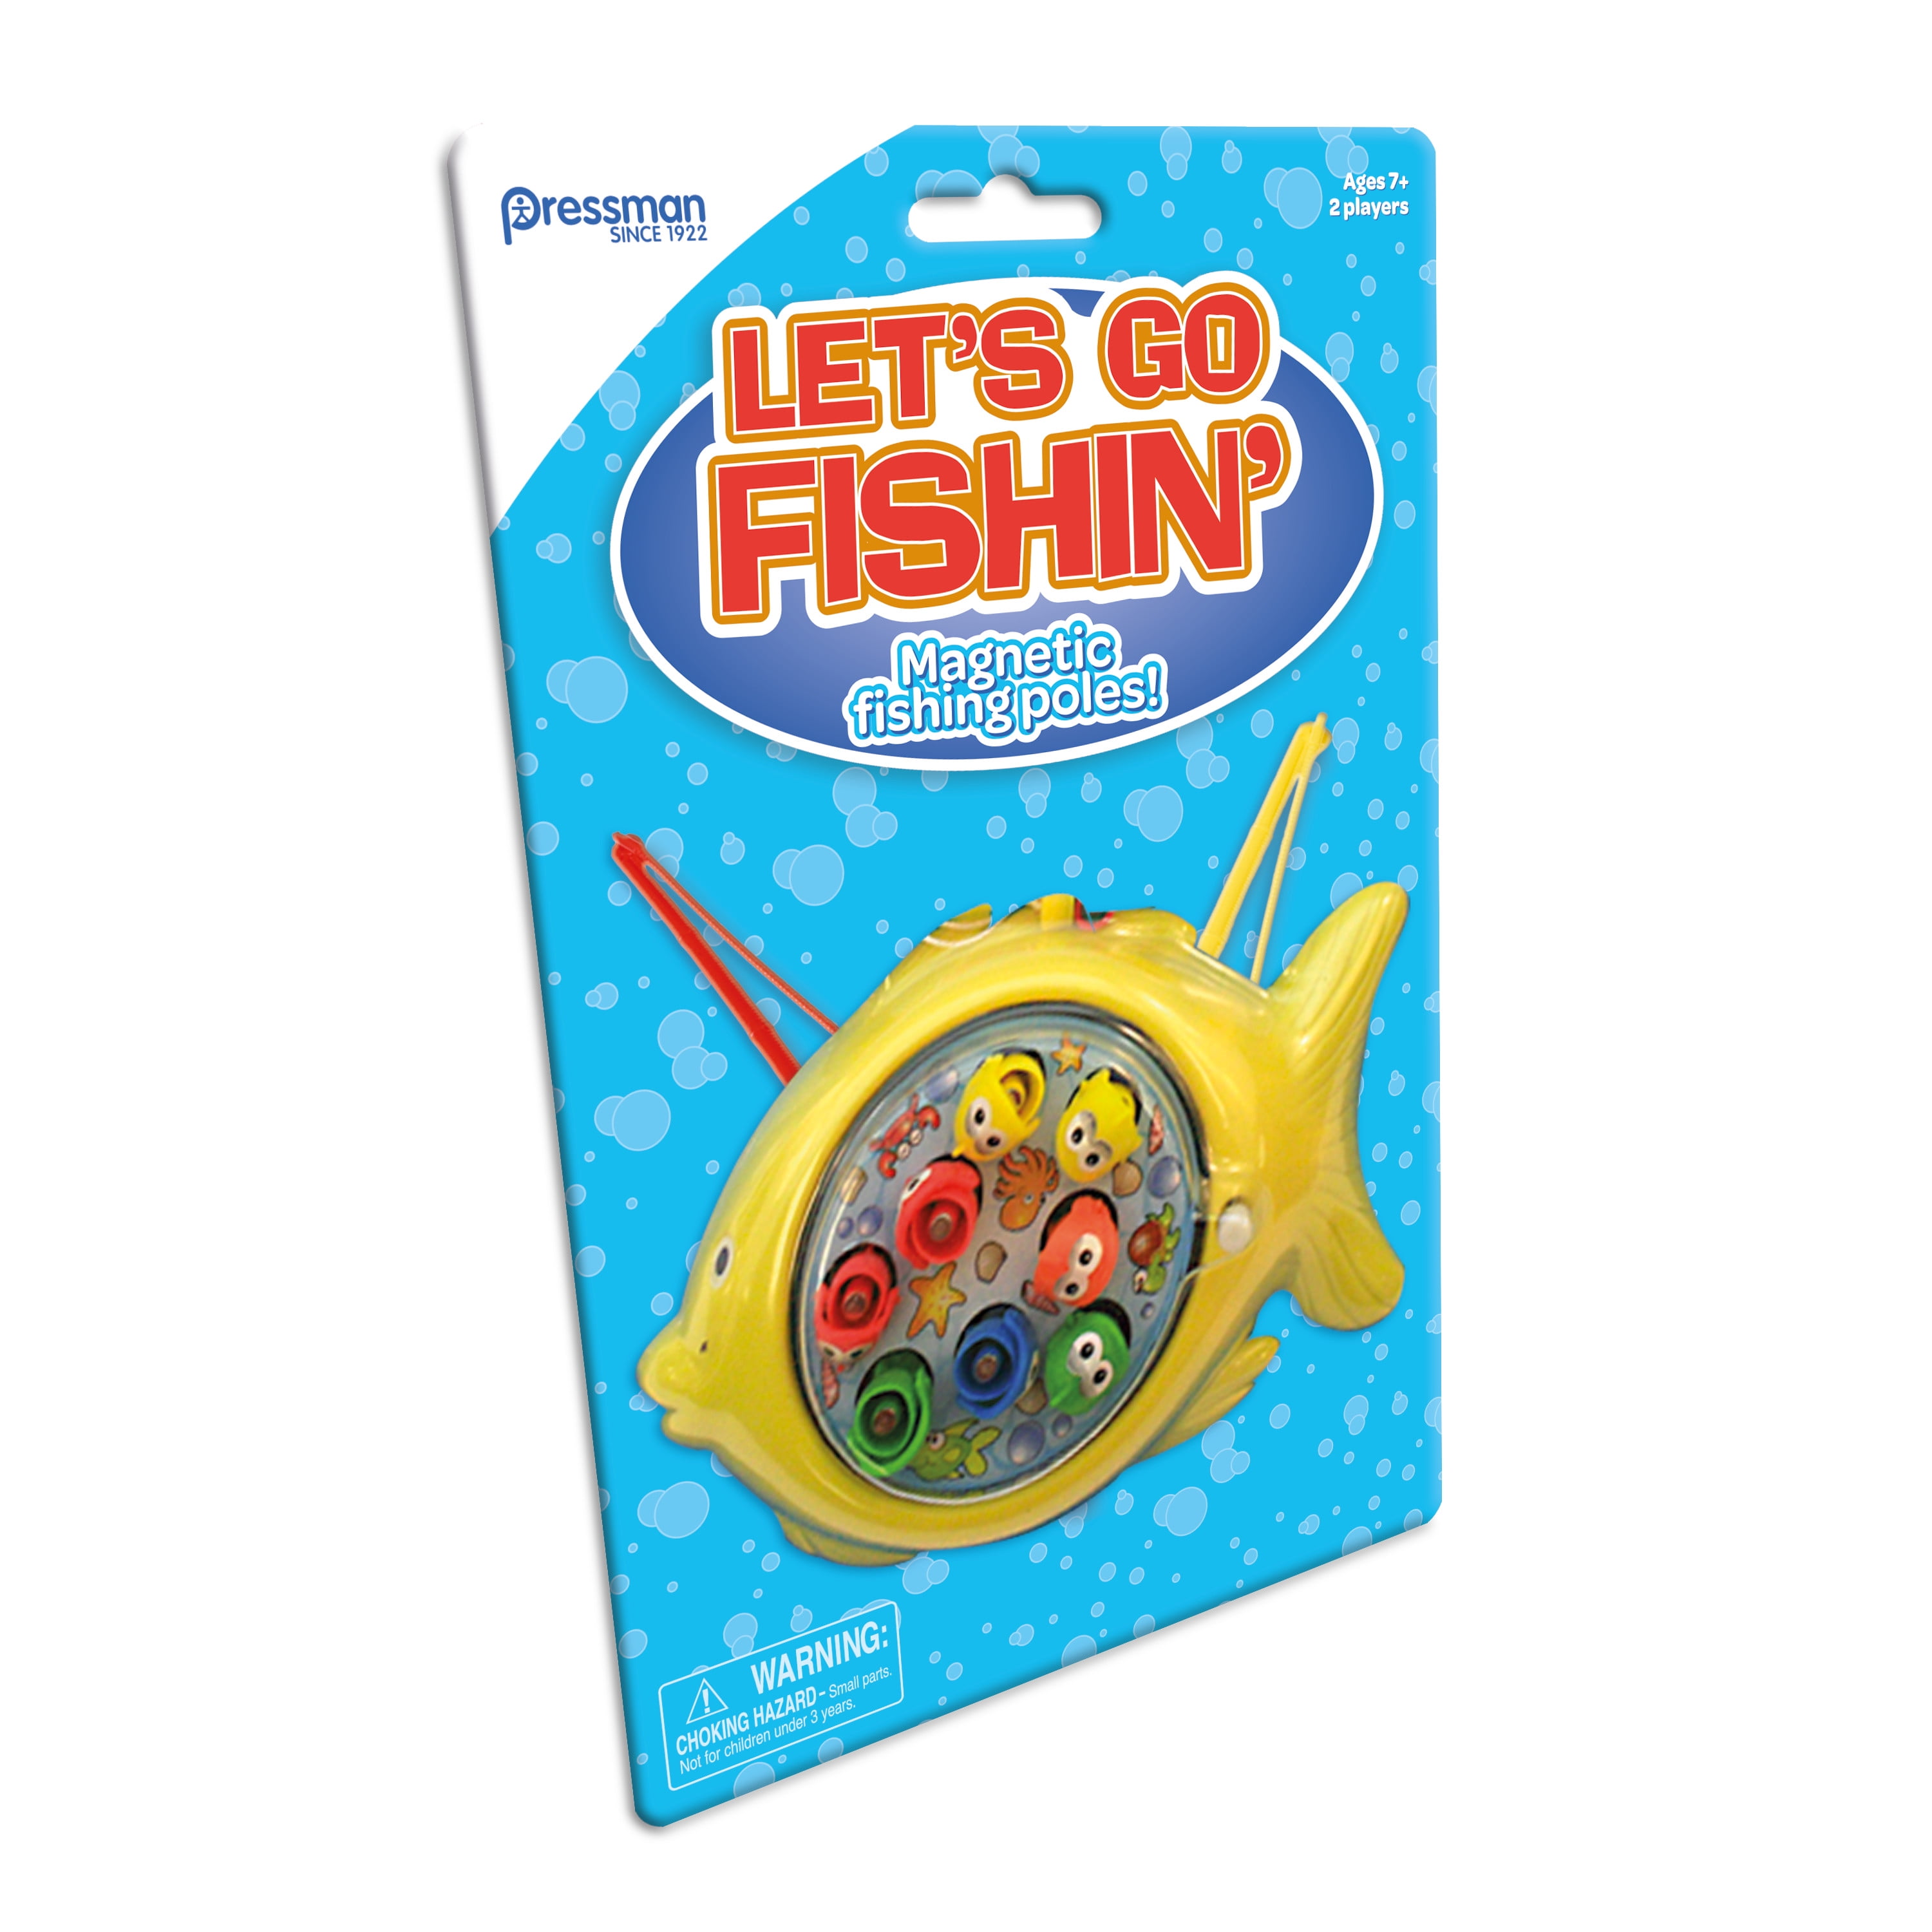 Pressman Let's Go Fishin' Game, The Original Fast Action Fishing Game  885362030151